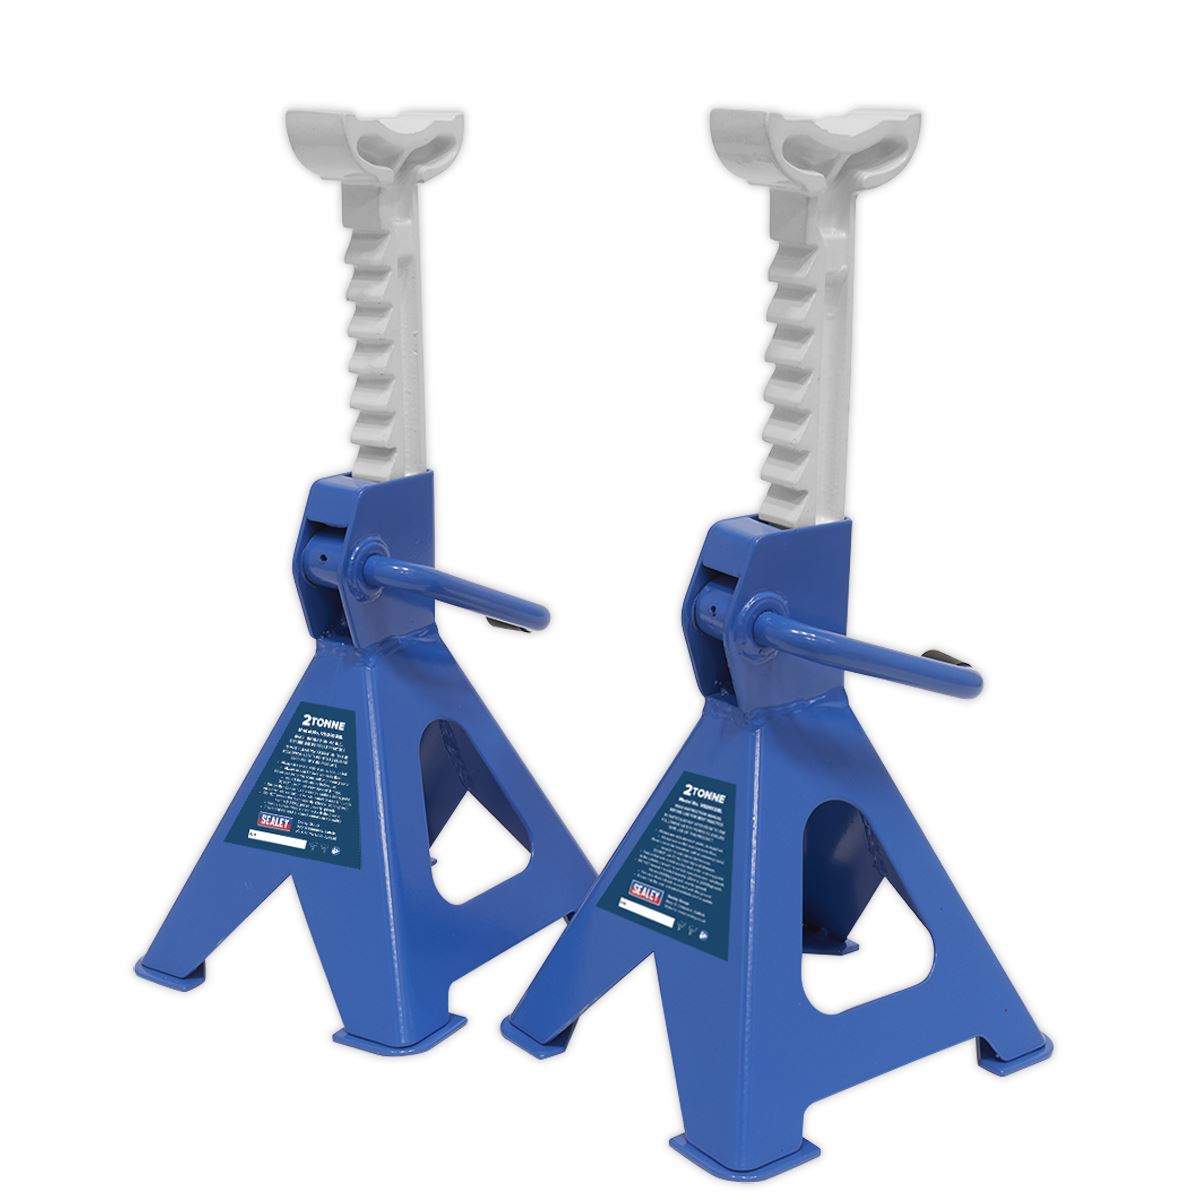 Sealey Ratchet Type Axle Stands (Pair) 2 Tonne Capacity per Stand - Blue